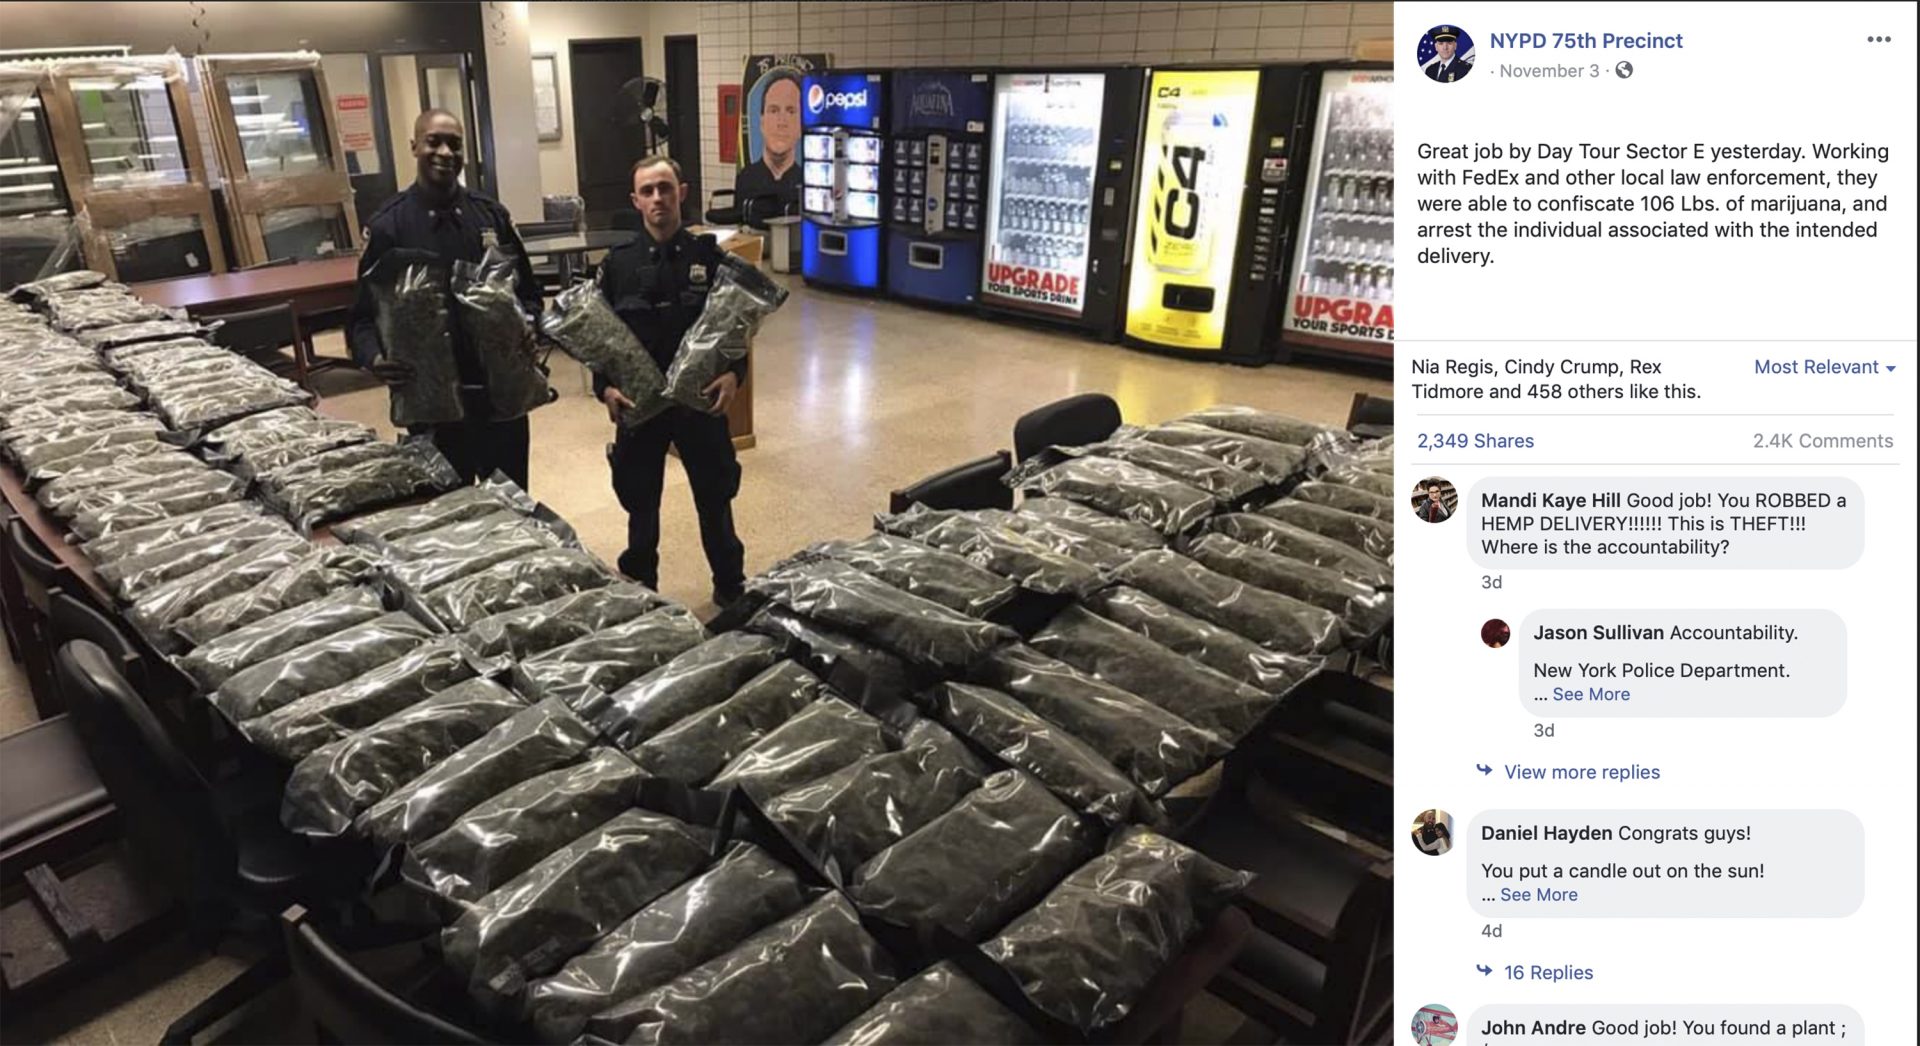 In this undated photo taken from the New York Police Department Facebook page,  officers stand by what NYPD thought was marijuana when they confiscated in the Brooklyn borough of New York on Saturday, Nov. 2, 2019, at the 75th Precinct of the NYPD in New York. The Vermont farm that grew the plants and the Brooklyn CBD shop that ordered them insist they're not pot, but legal industrial hemp.